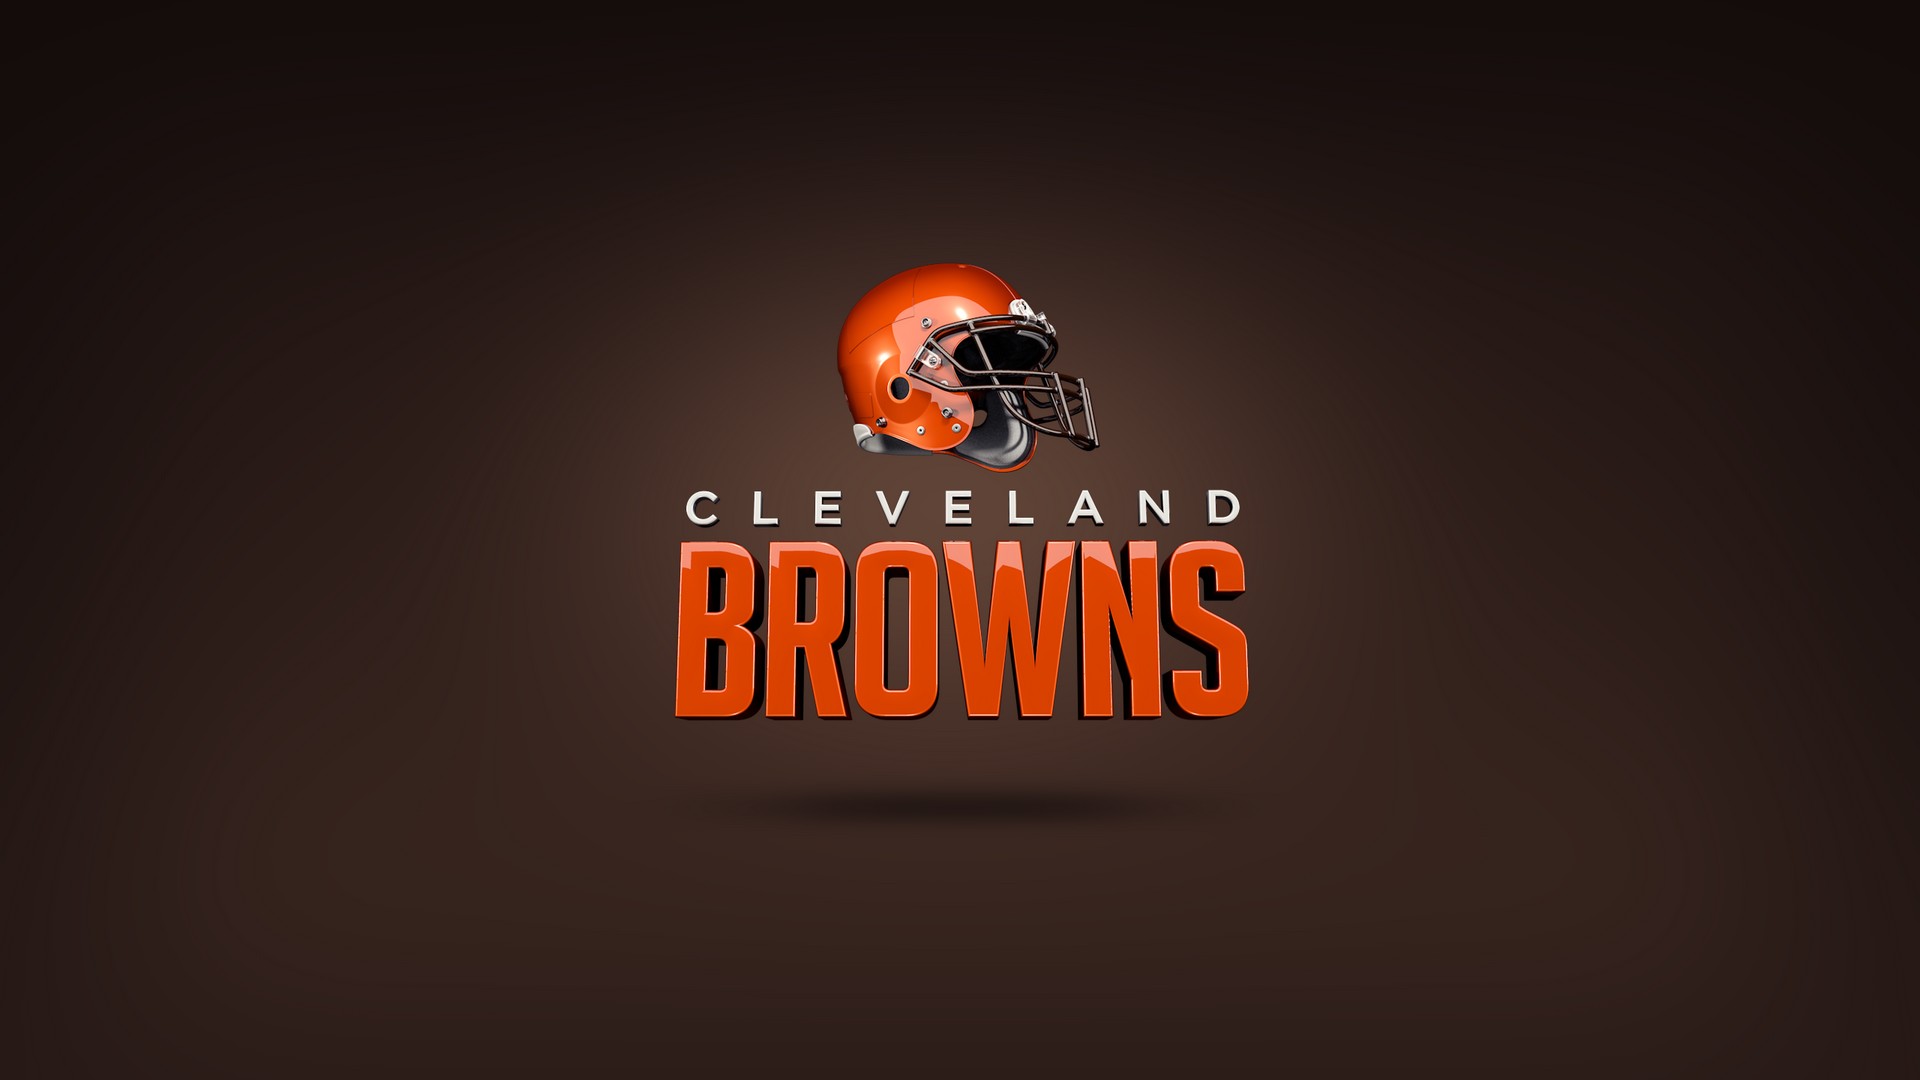 Windows Wallpaper Cleveland Browns With Resolution 1920X1080